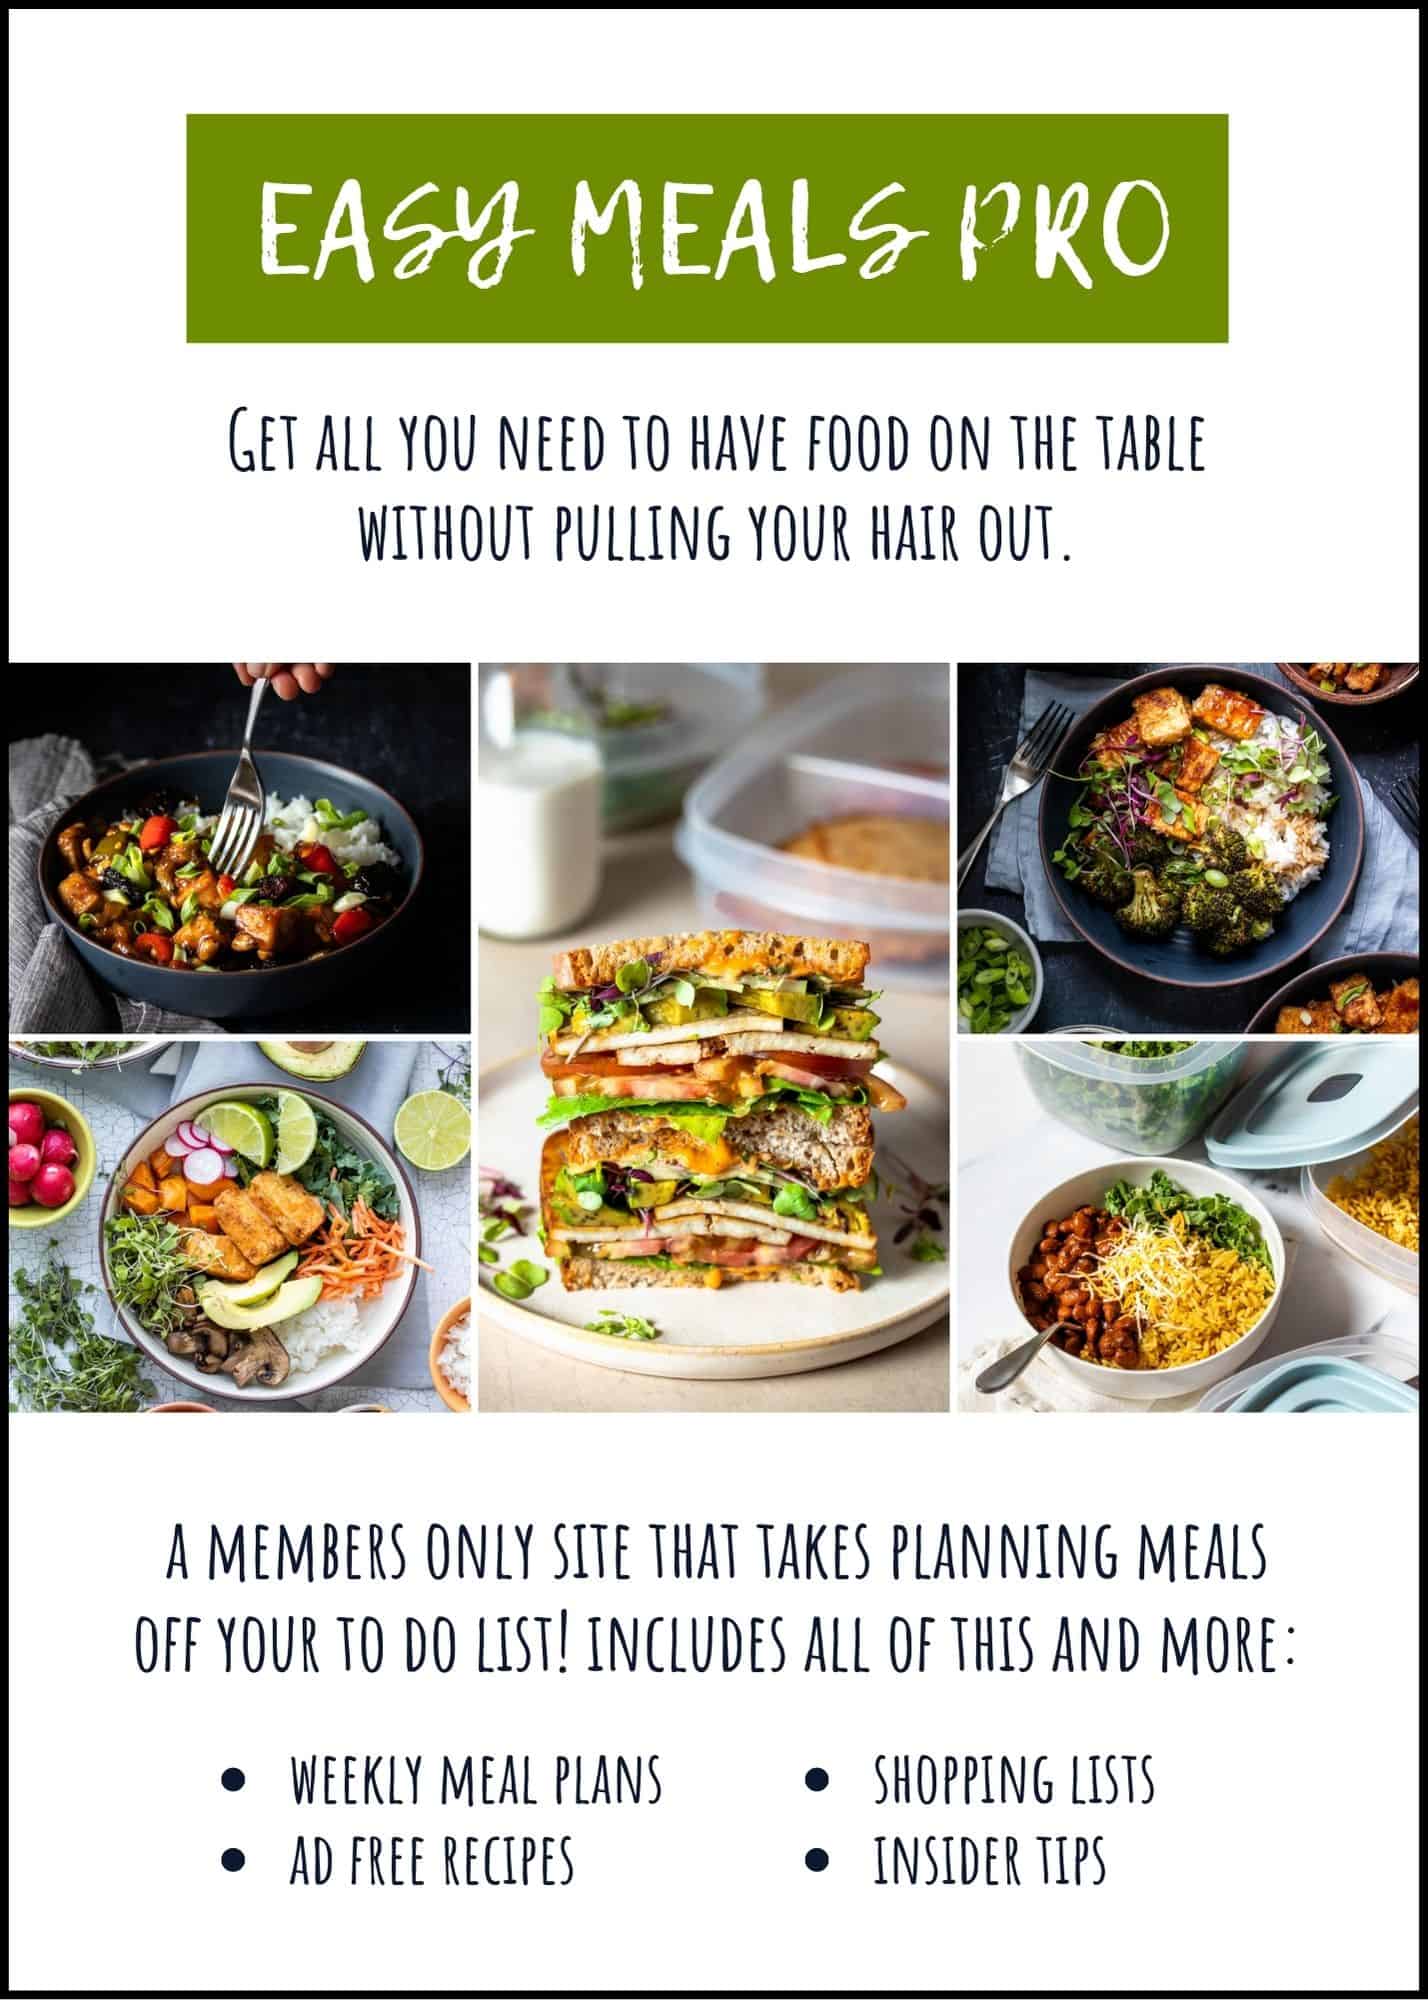 A collage of five photos of different meals on a white background with a green title text block above and other overlay text above and below.